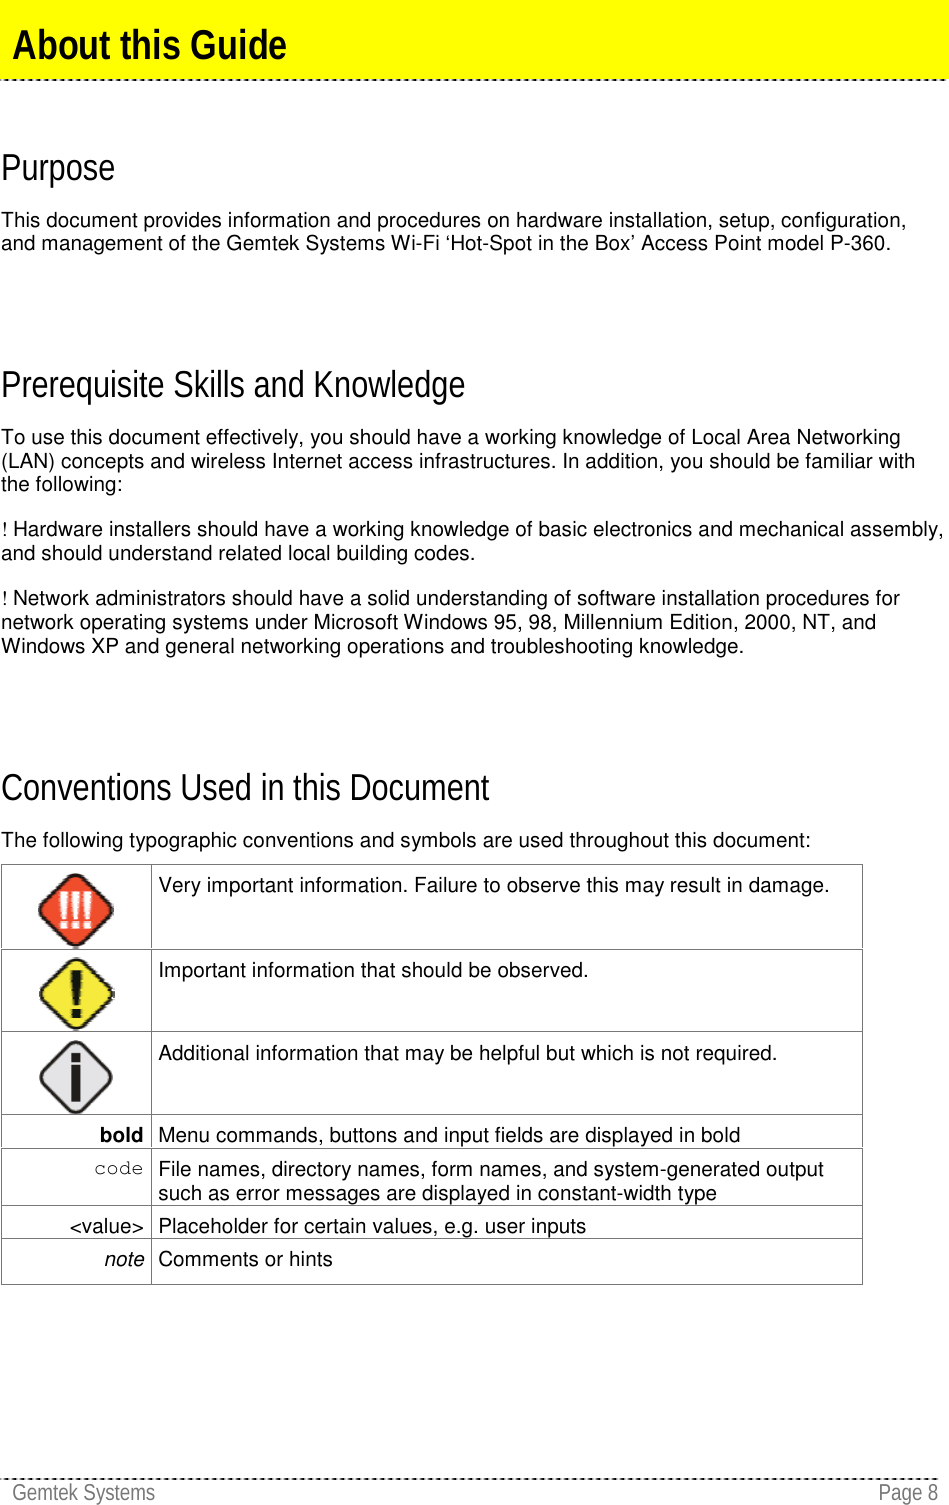 Gemtek Systems Page 8PurposeThis document provides information and procedures on hardware installation, setup, configuration,and management of the Gemtek Systems Wi-Fi ‘Hot-Spot in the Box’ Access Point model P-360.Prerequisite Skills and KnowledgeTo use this document effectively, you should have a working knowledge of Local Area Networking(LAN) concepts and wireless Internet access infrastructures. In addition, you should be familiar withthe following:! Hardware installers should have a working knowledge of basic electronics and mechanical assembly,and should understand related local building codes.! Network administrators should have a solid understanding of software installation procedures fornetwork operating systems under Microsoft Windows 95, 98, Millennium Edition, 2000, NT, andWindows XP and general networking operations and troubleshooting knowledge.Conventions Used in this DocumentThe following typographic conventions and symbols are used throughout this document:Very important information. Failure to observe this may result in damage.Important information that should be observed. Additional information that may be helpful but which is not required.bold Menu commands, buttons and input fields are displayed in boldcode File names, directory names, form names, and system-generated outputsuch as error messages are displayed in constant-width type&lt;value&gt; Placeholder for certain values, e.g. user inputsnote Comments or hintsAbout this Guide